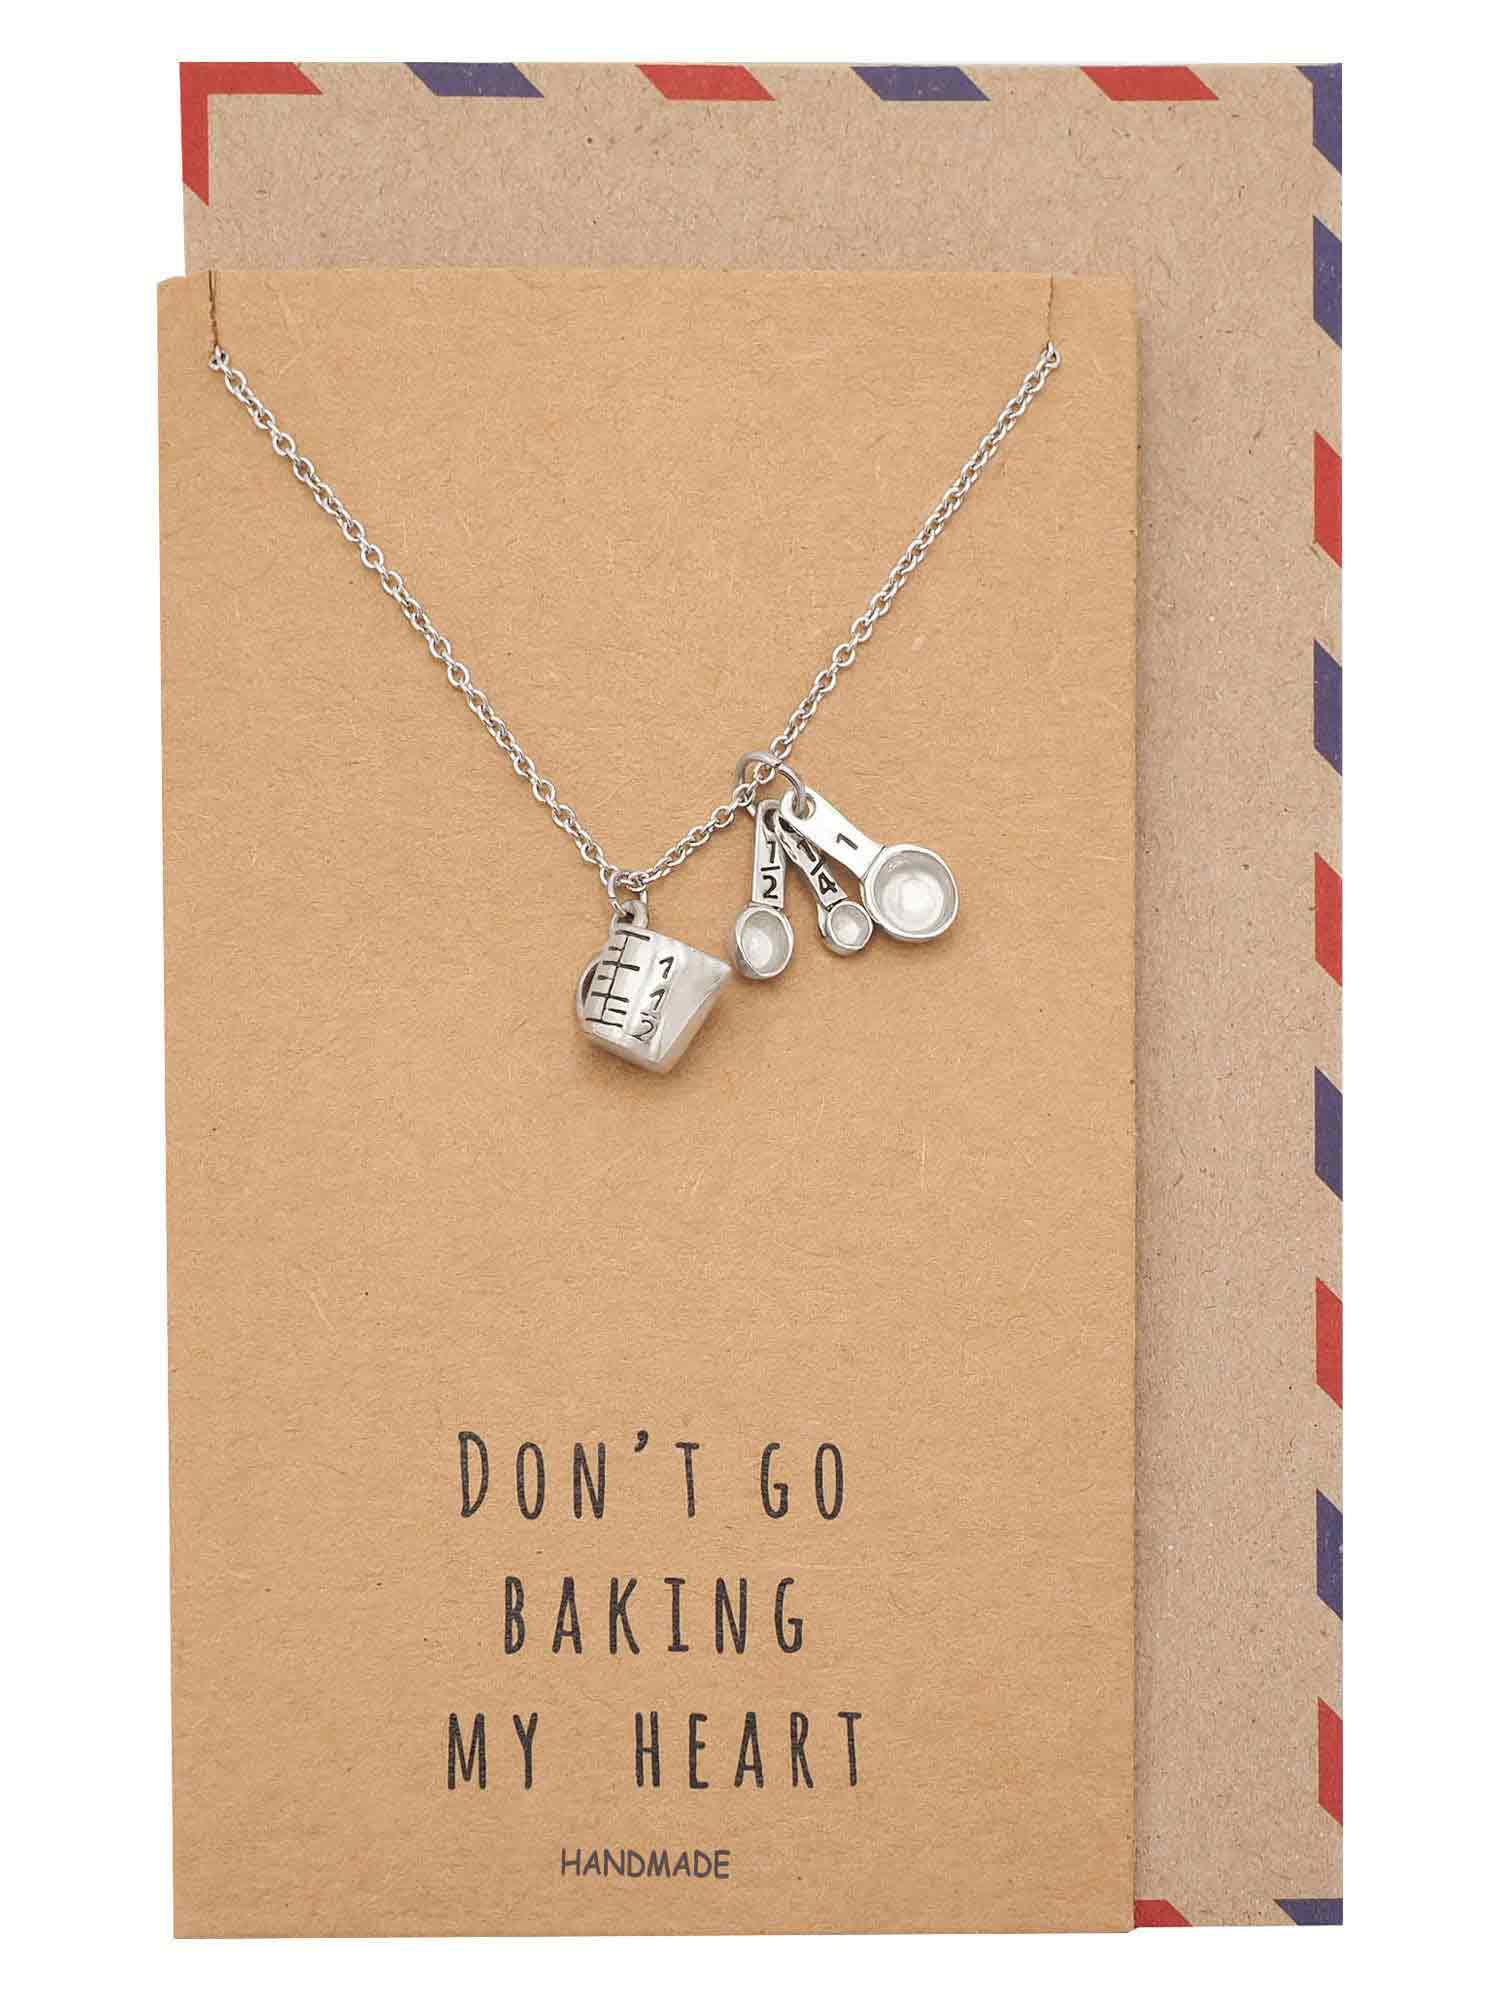 Cooking and Baking Jewelry